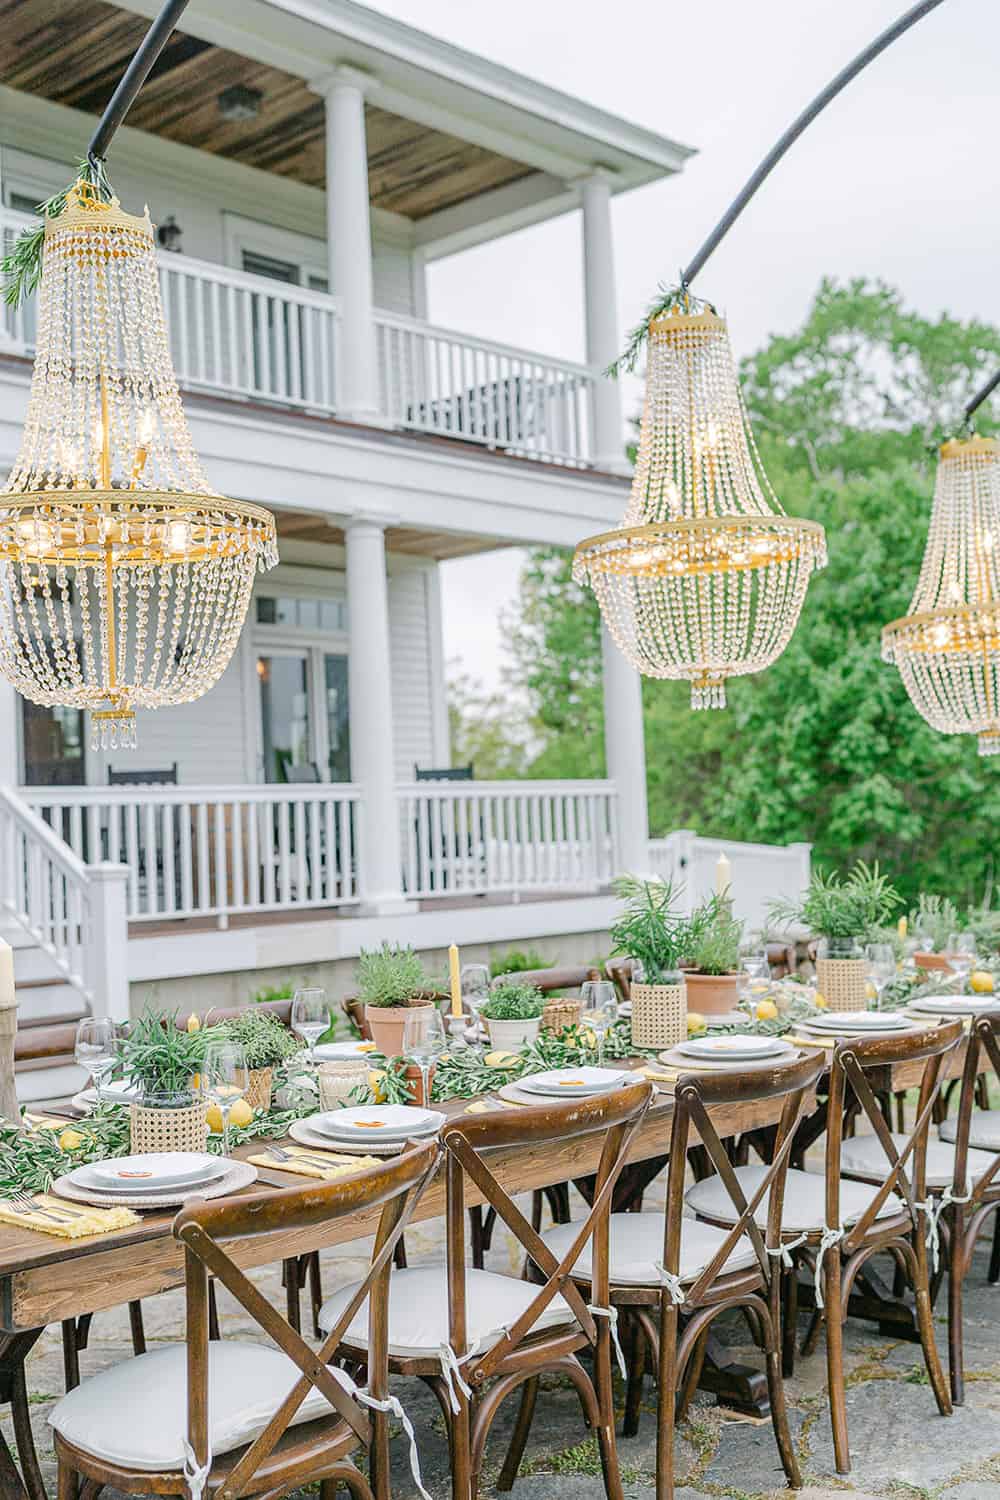 Elegant reception table with wooden chairs, adorned with greenery and chandeliers, in front of a white house with balconies.